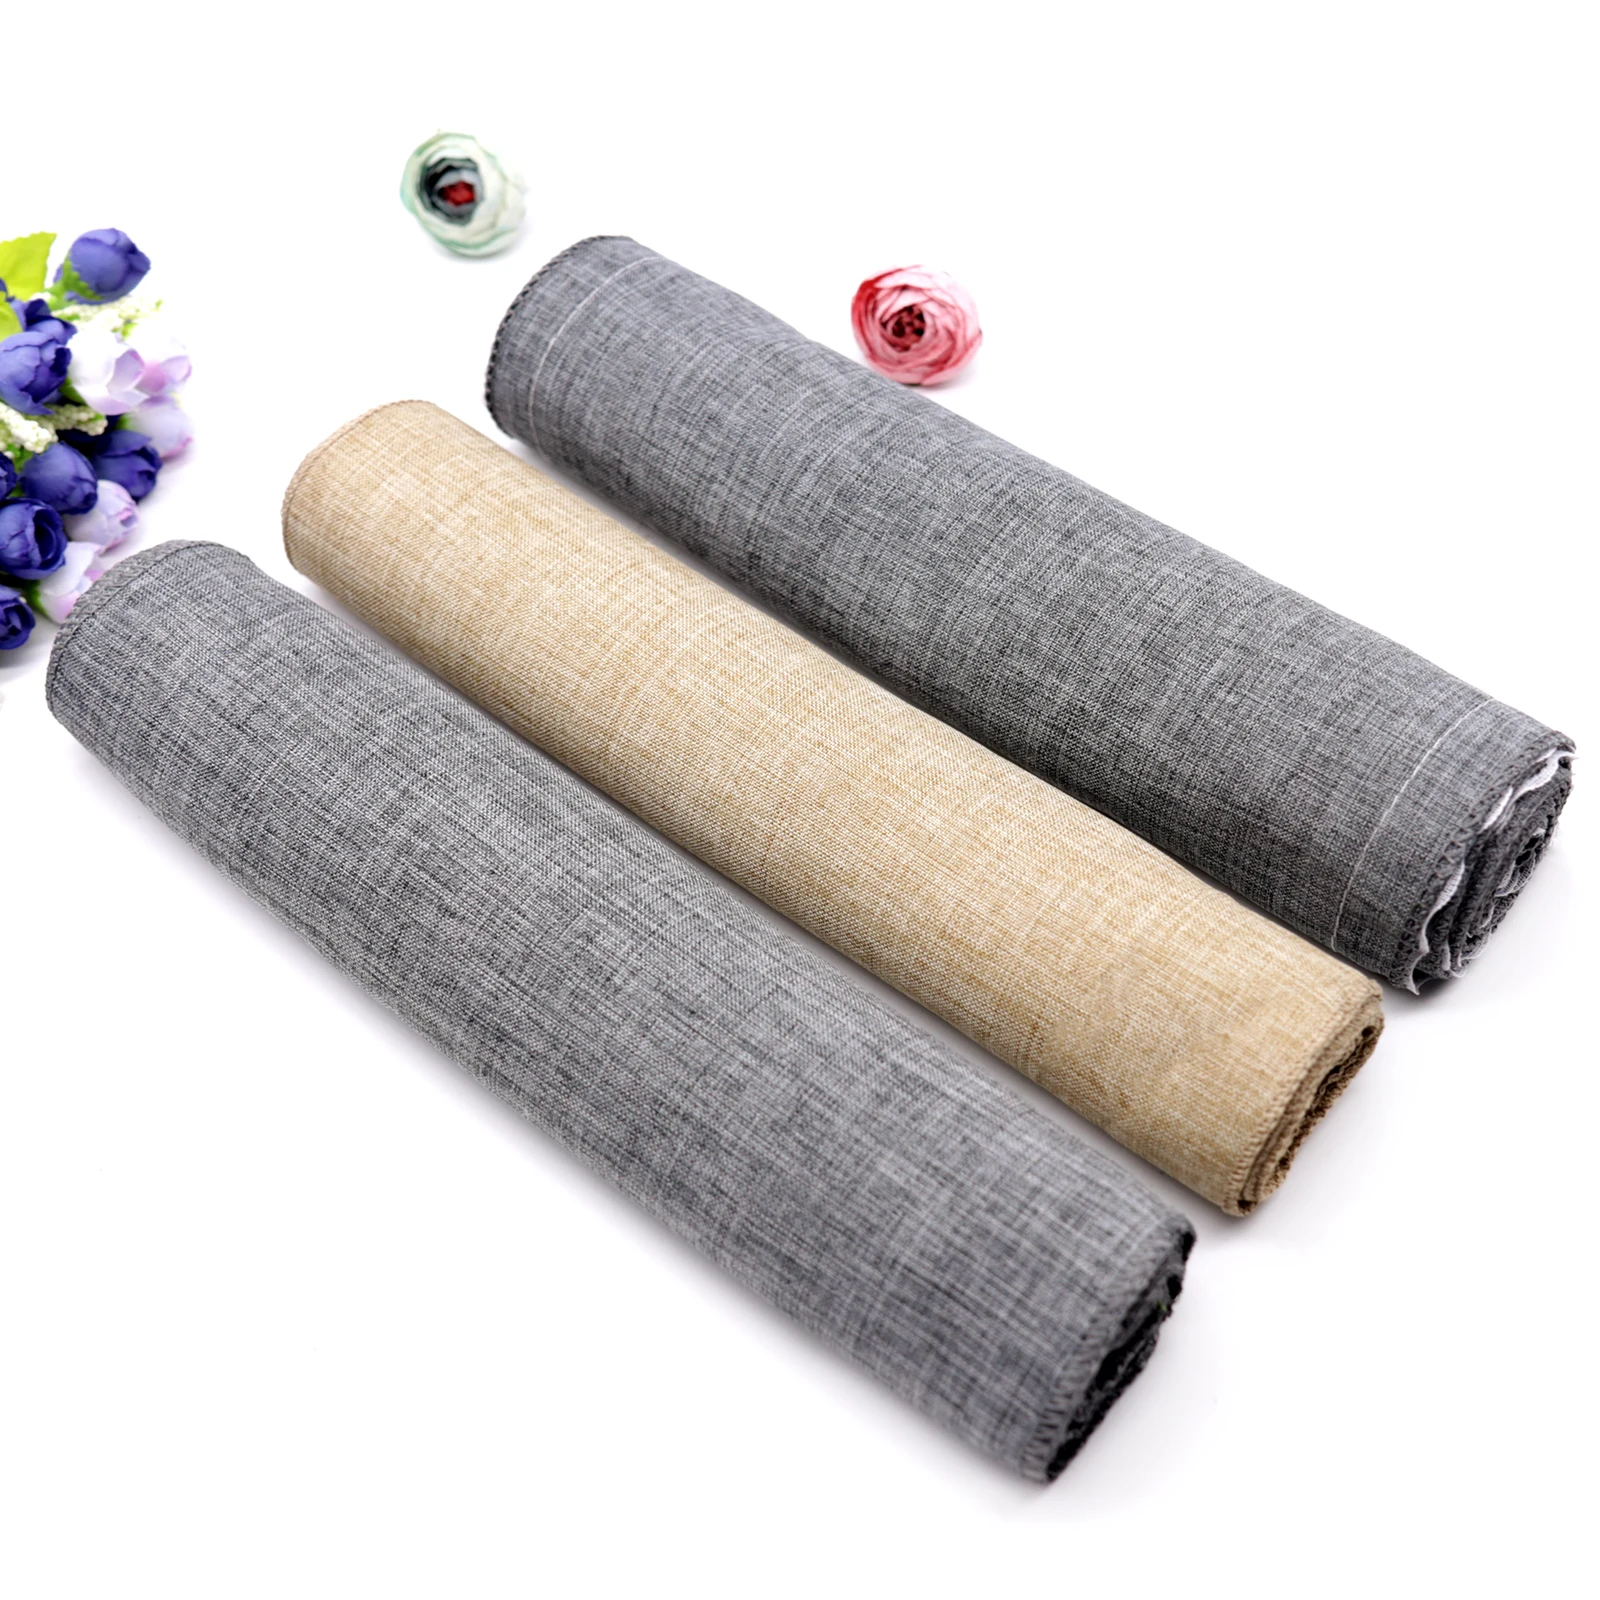 Imitation Linen Table Runners Table Decoration for Home Party Wedding Christmas Decorations Table Runner Cloth Runners Modern